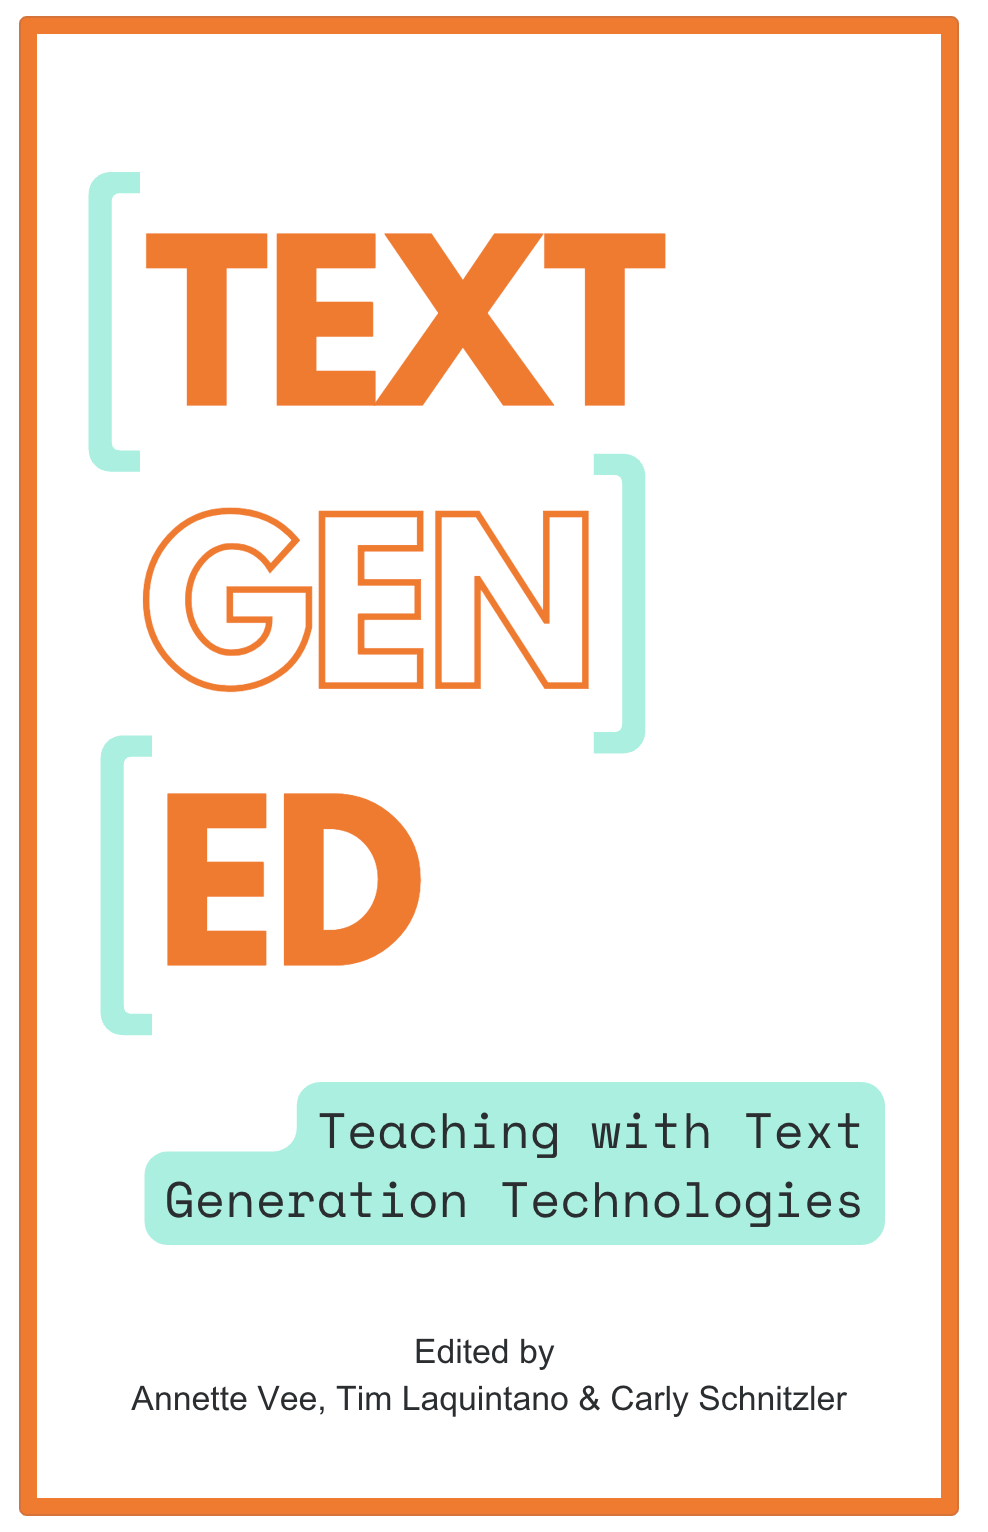 TextGenEd: Teaching with Text Generation Technologies book cover. Edited by Annette Vee, Tim Laquintano, & Carly Schnitzler